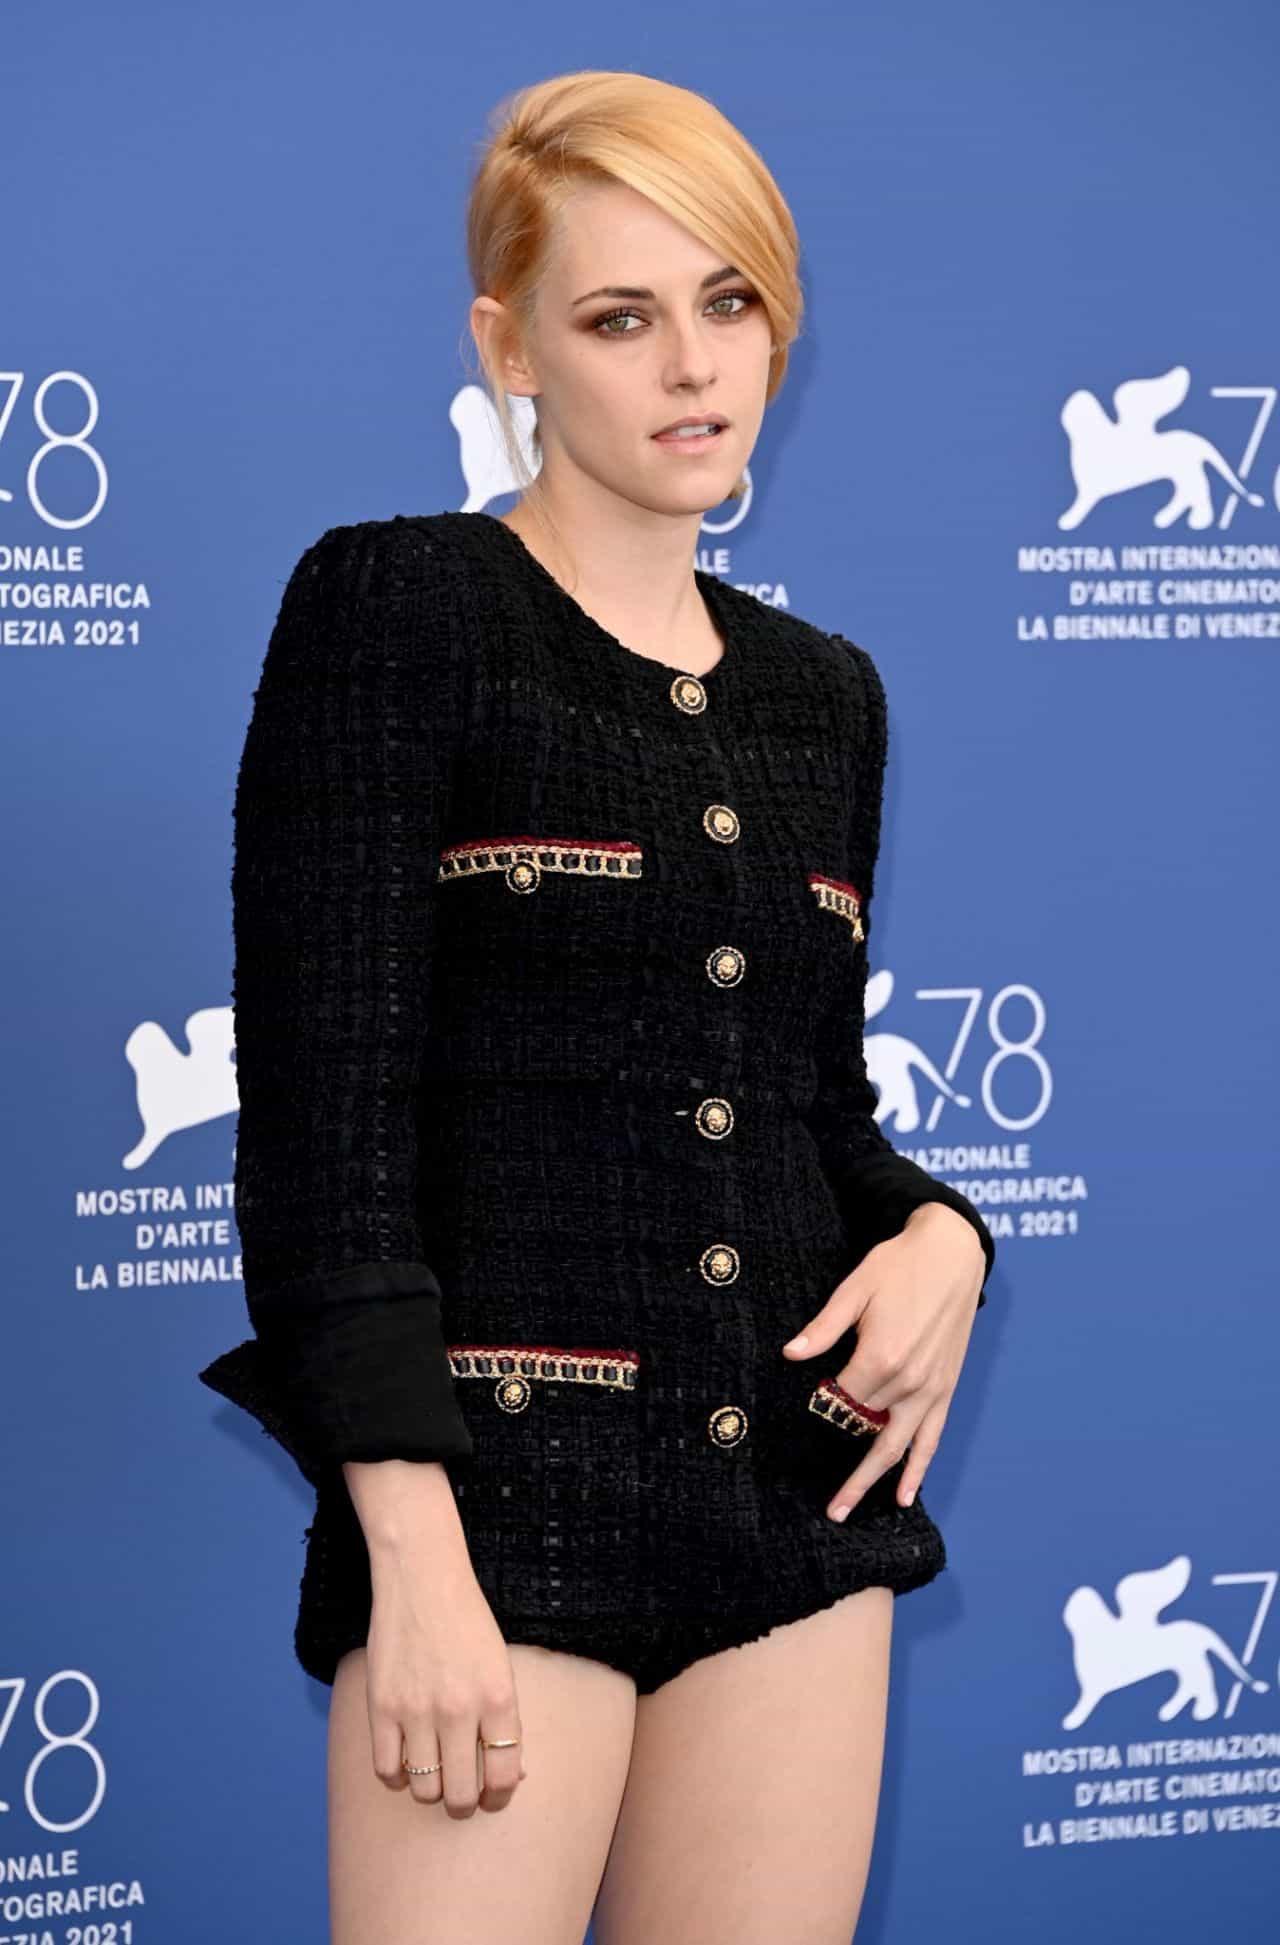 Kristen Stewart Made a Stylish Entrance to the Photocall for the New Movie Spencer